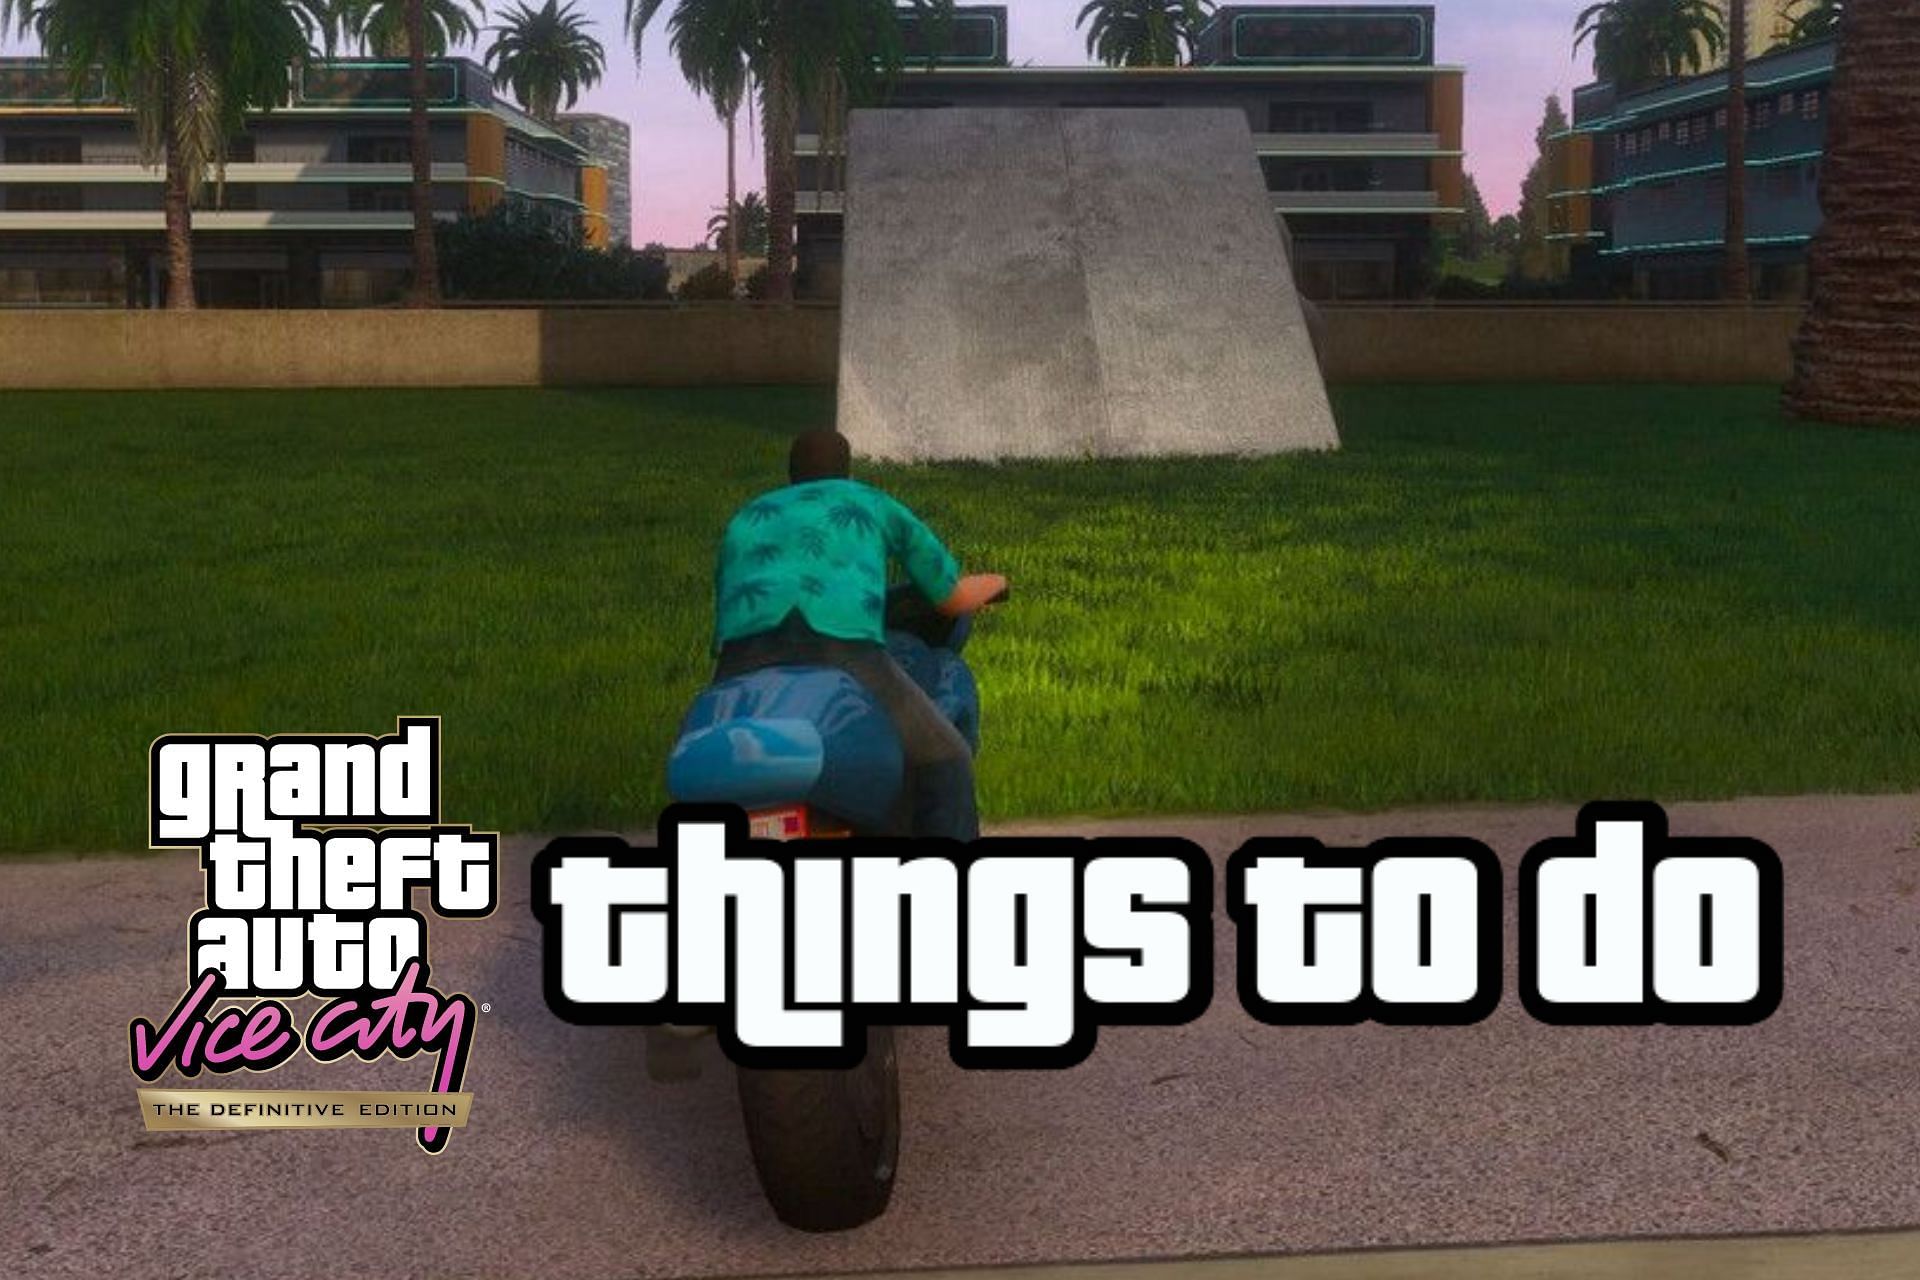 Five enjoyable activities for GTA players to try after completing Vice City Definitive Edition (Image via Rockstar Games)